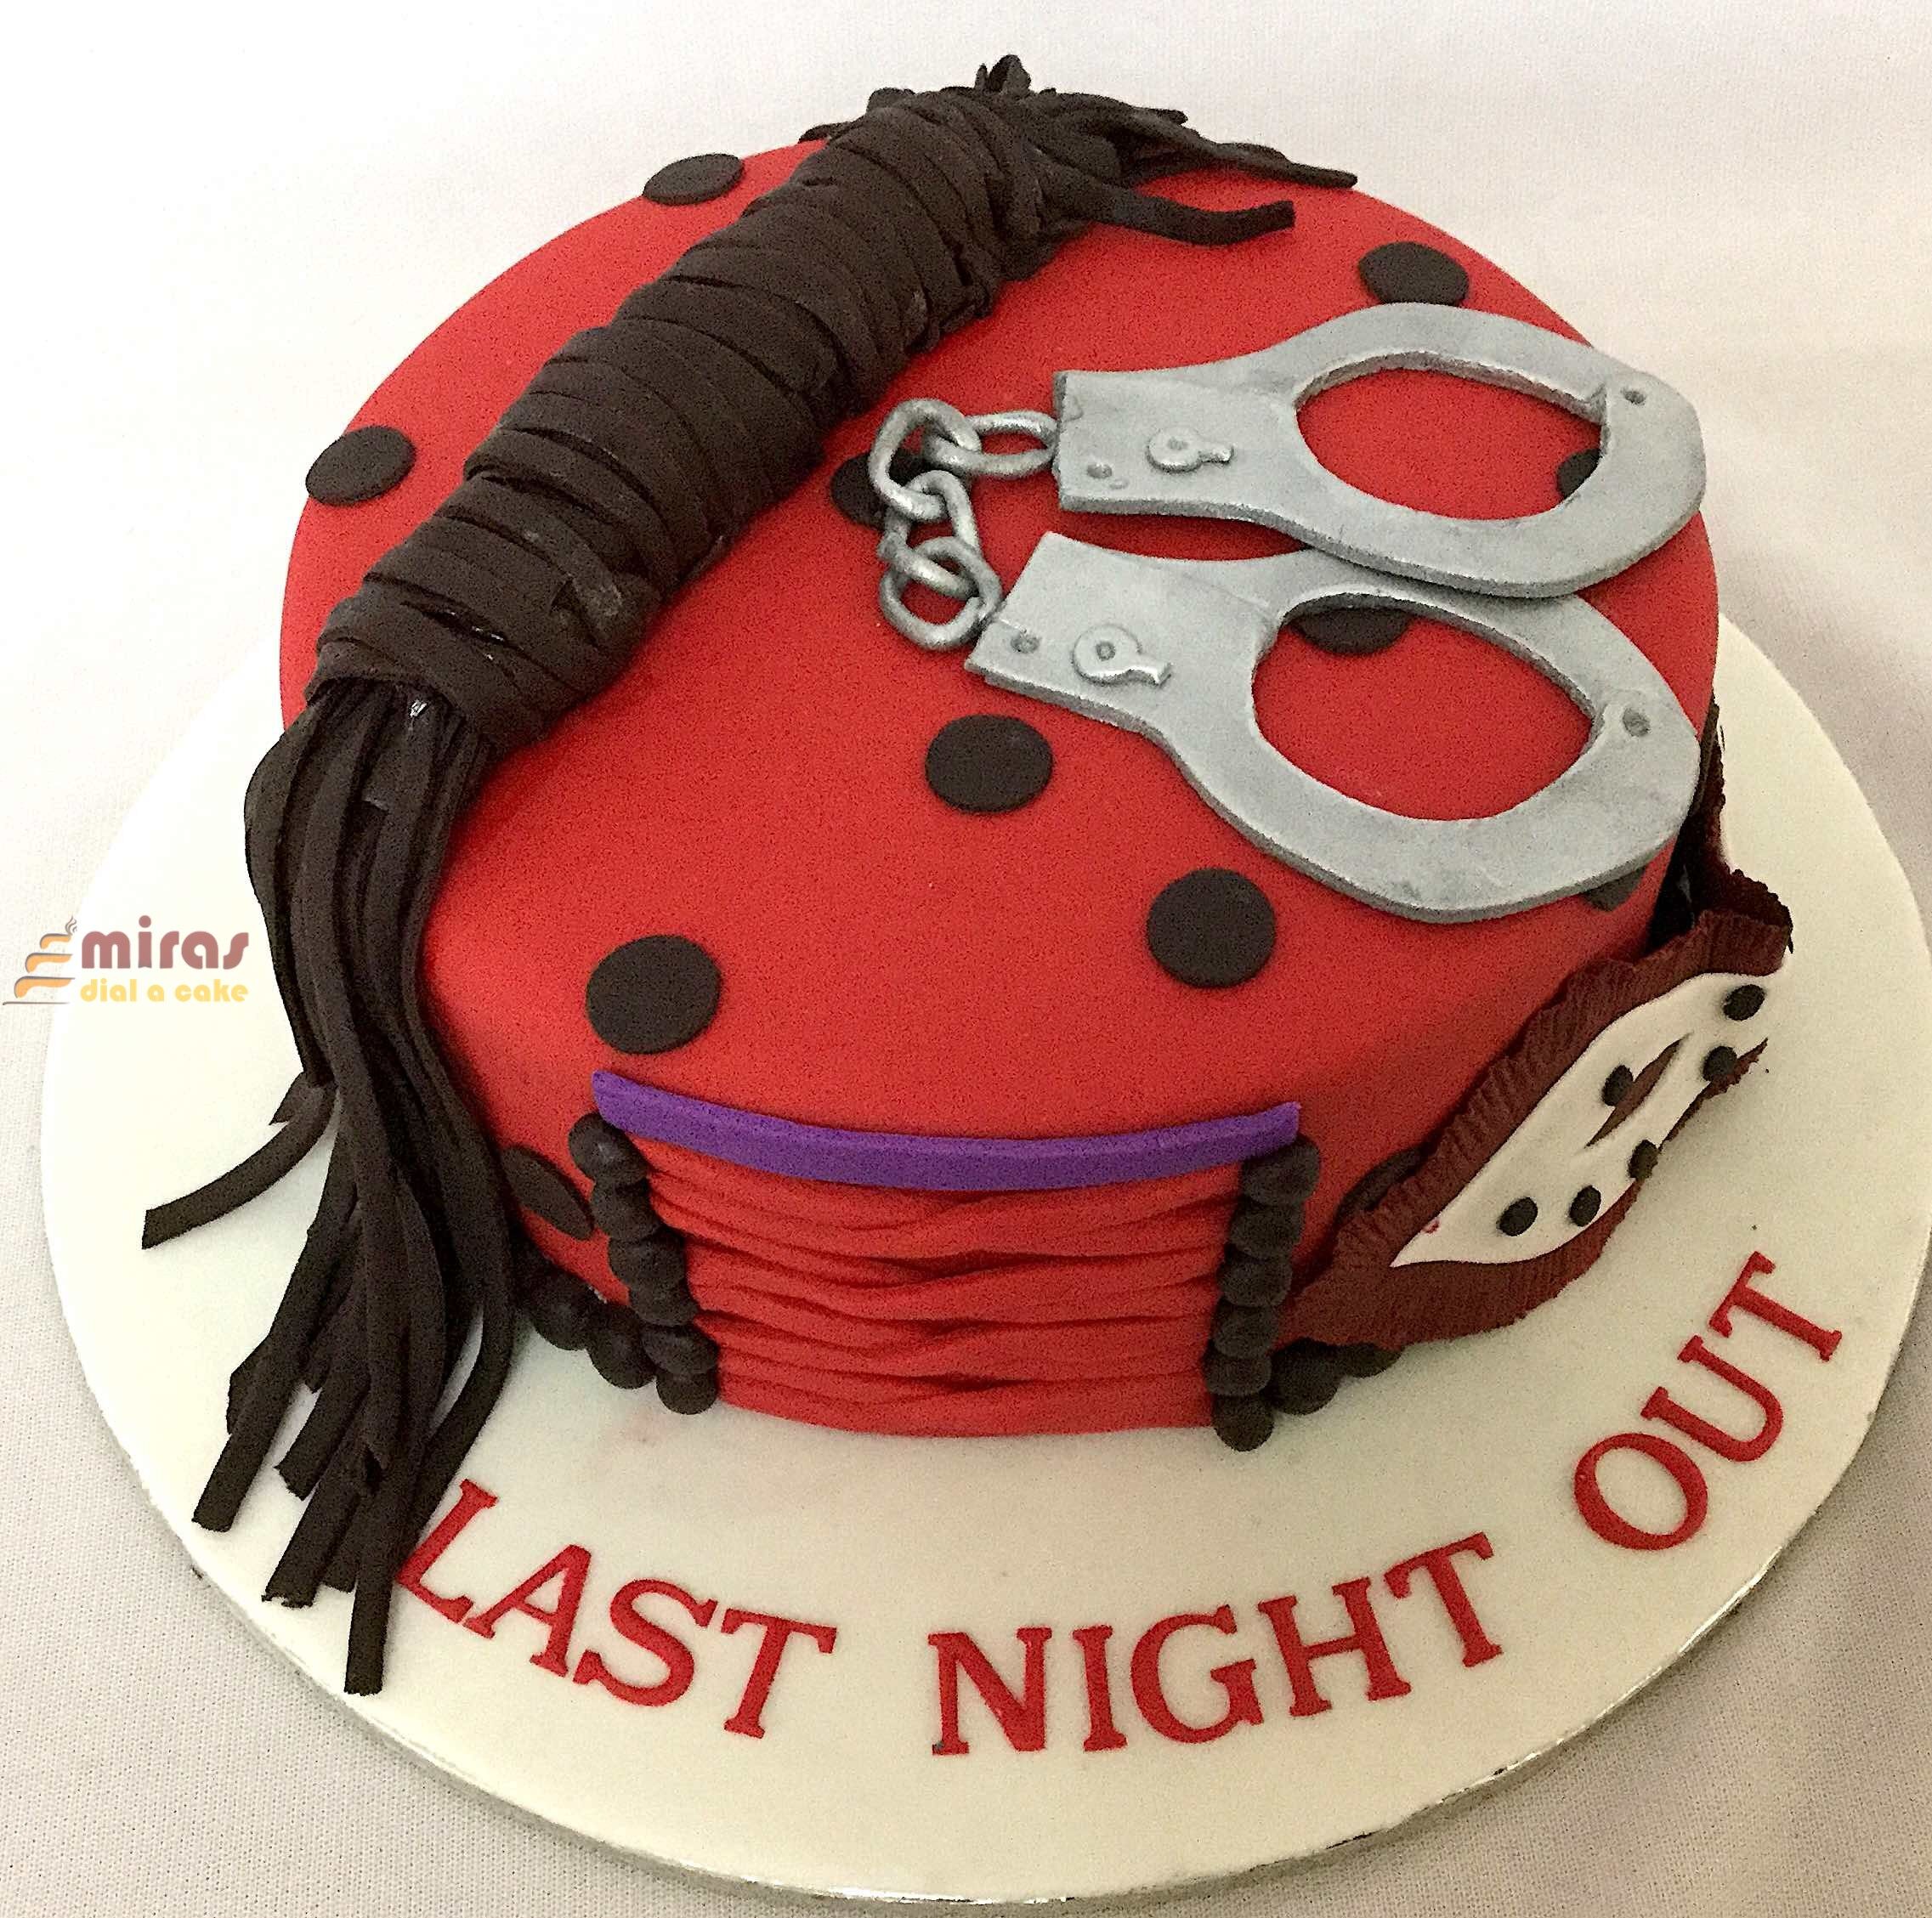 A ladybug cake with handcuffs on it